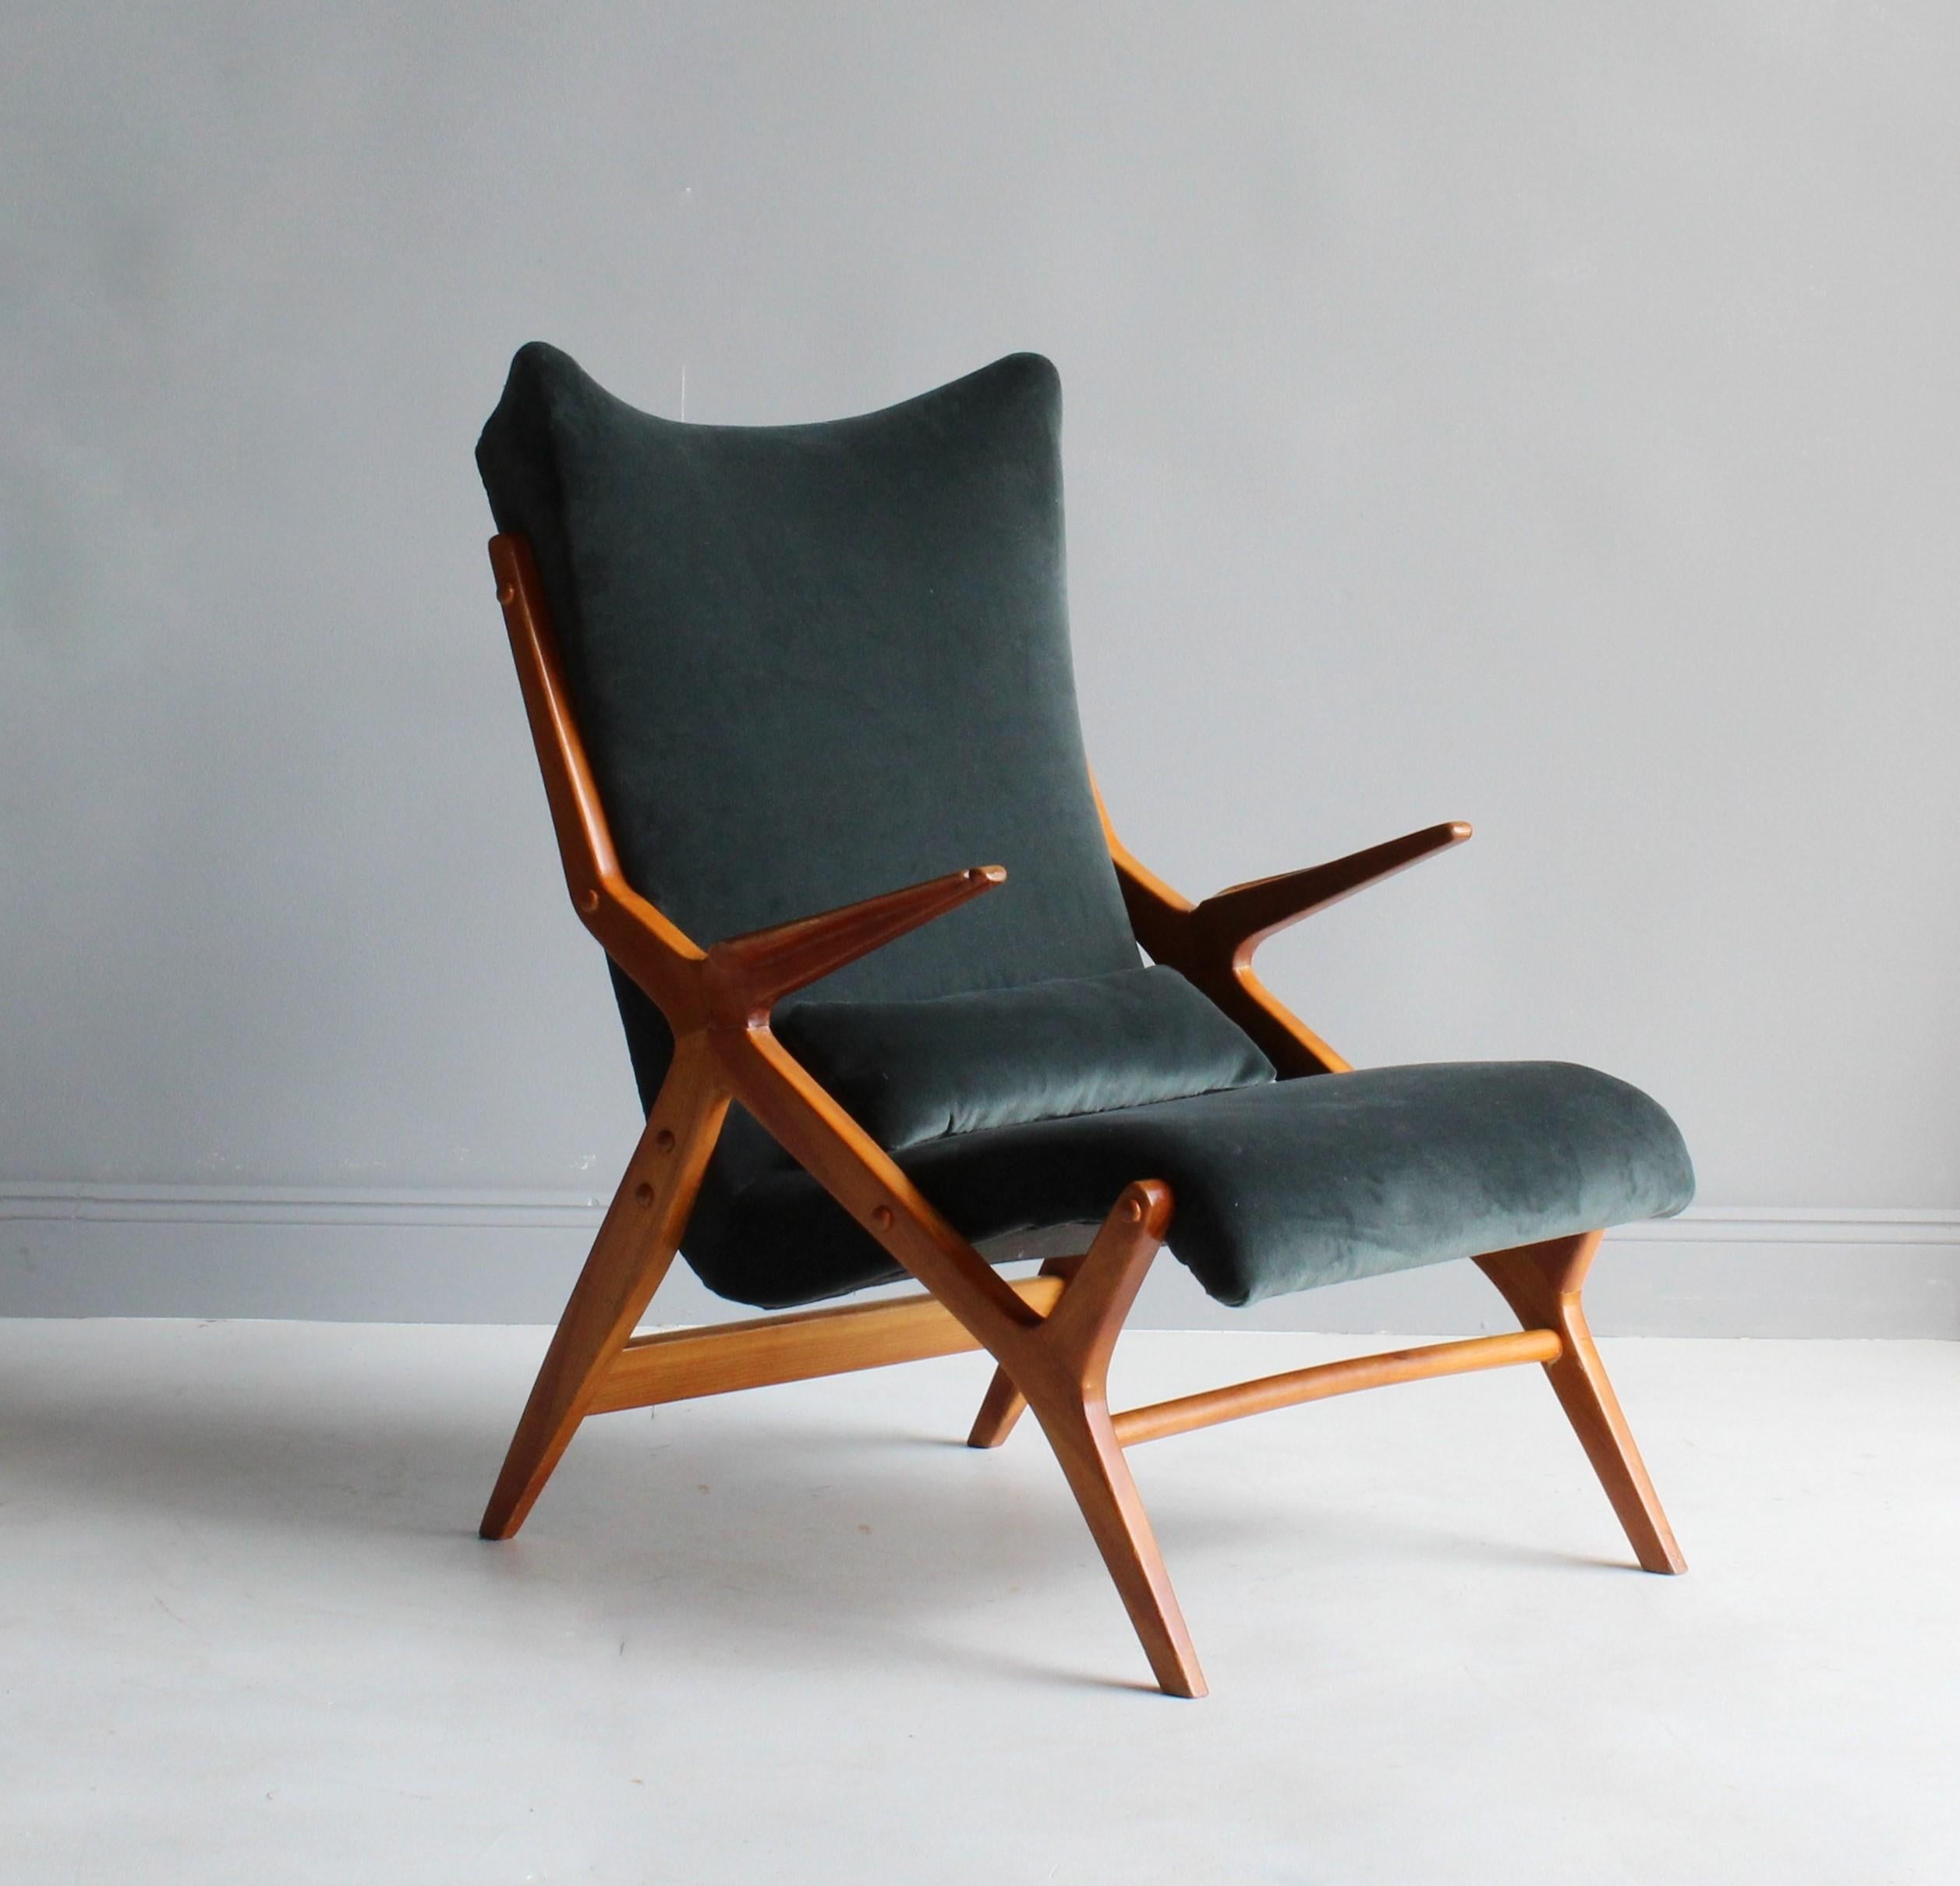 A modernist lounge chair / armchair. Designed by an unknown Swedish modernist designer. Reupholstered in brand new high-end velvet. Inspiration was likely drawn from Italian design of the period.



 